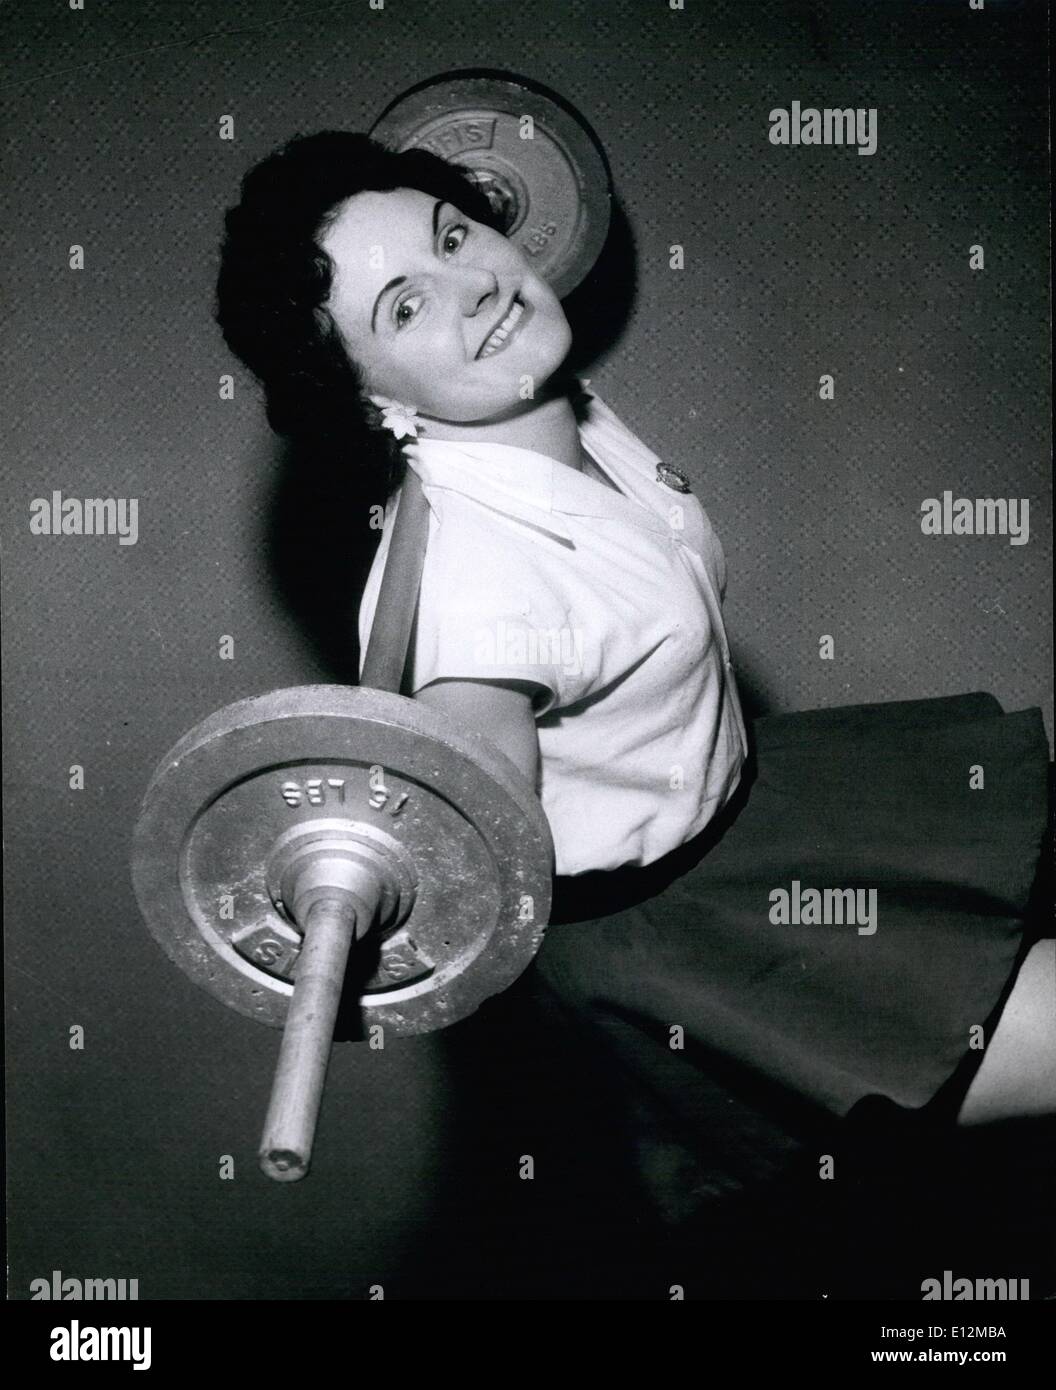 Feb. 24, 2012 - Judging by Mrs. Jean Leamey' happy smile lifting weights seems to be the easiest thing in the world. Here she lifts a 30 lbs barbell. During this every morning helped to cure her asthma. Stock Photo